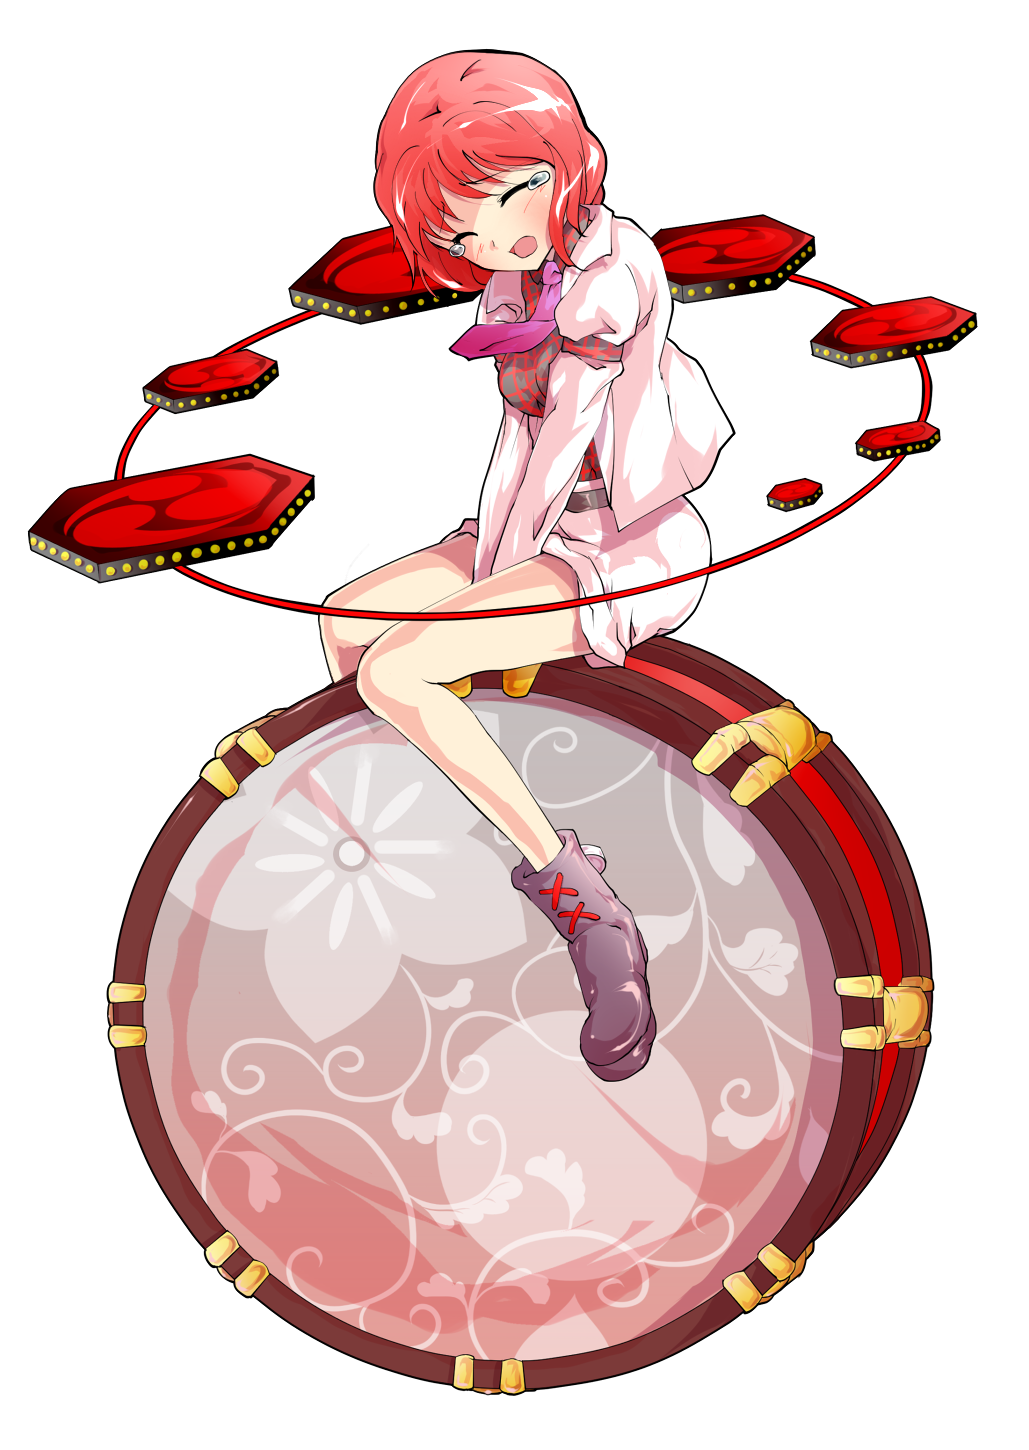 1girl alphes_(style) blush boots closed_eyes crying d: dairi drum highres horikawa_raiko instrument jacket legs looking_at_viewer necktie open_mouth parody pink_hair red_eyes sad short_hair skirt solo style_parody tachi-e tears touhou v_arms